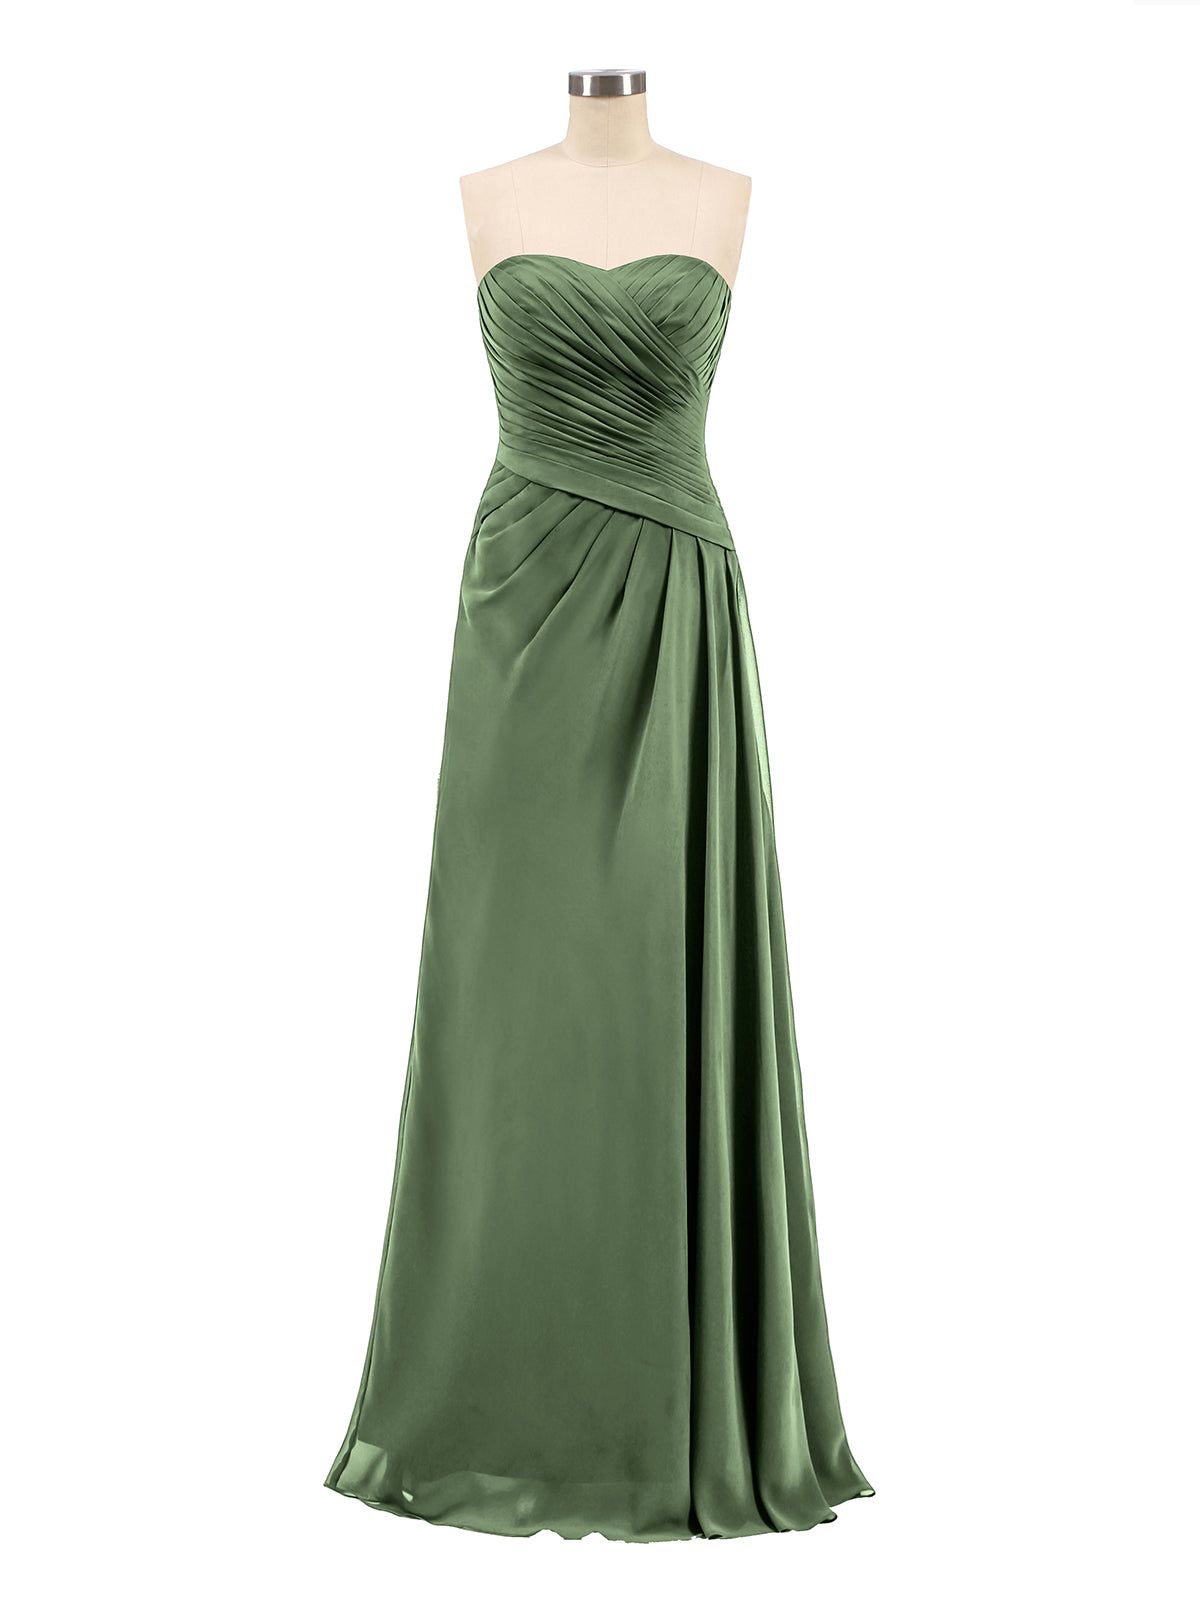 Madeline Strapless Sweetheart Neck Chiffon Bridesmaid Gown-Olive Green ...